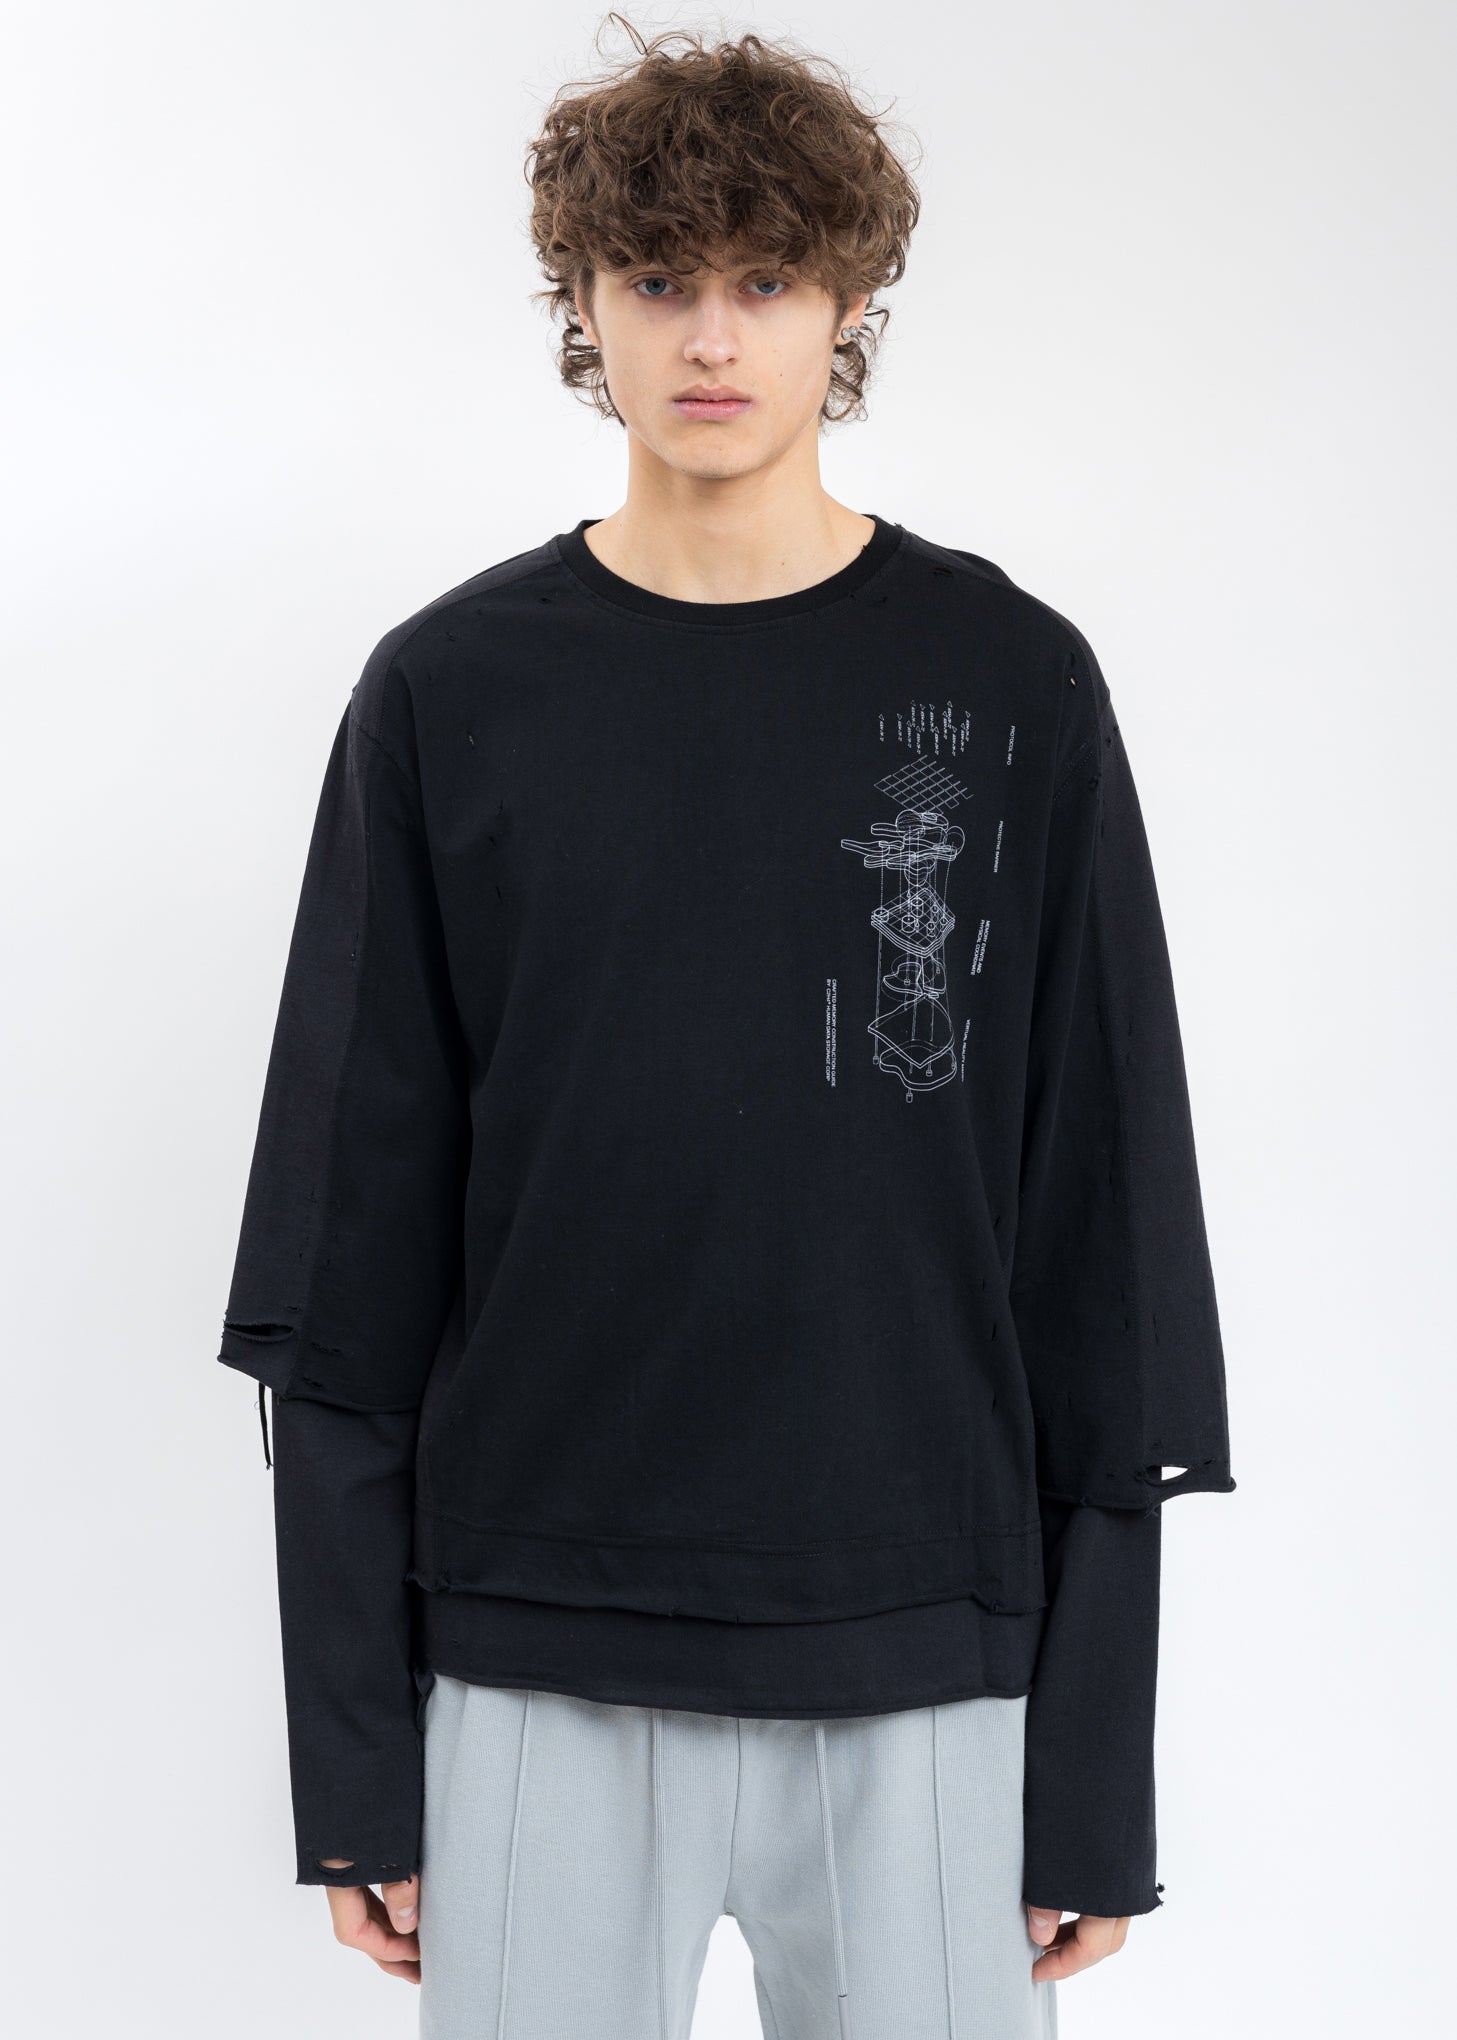 double layer long sleeve - Black